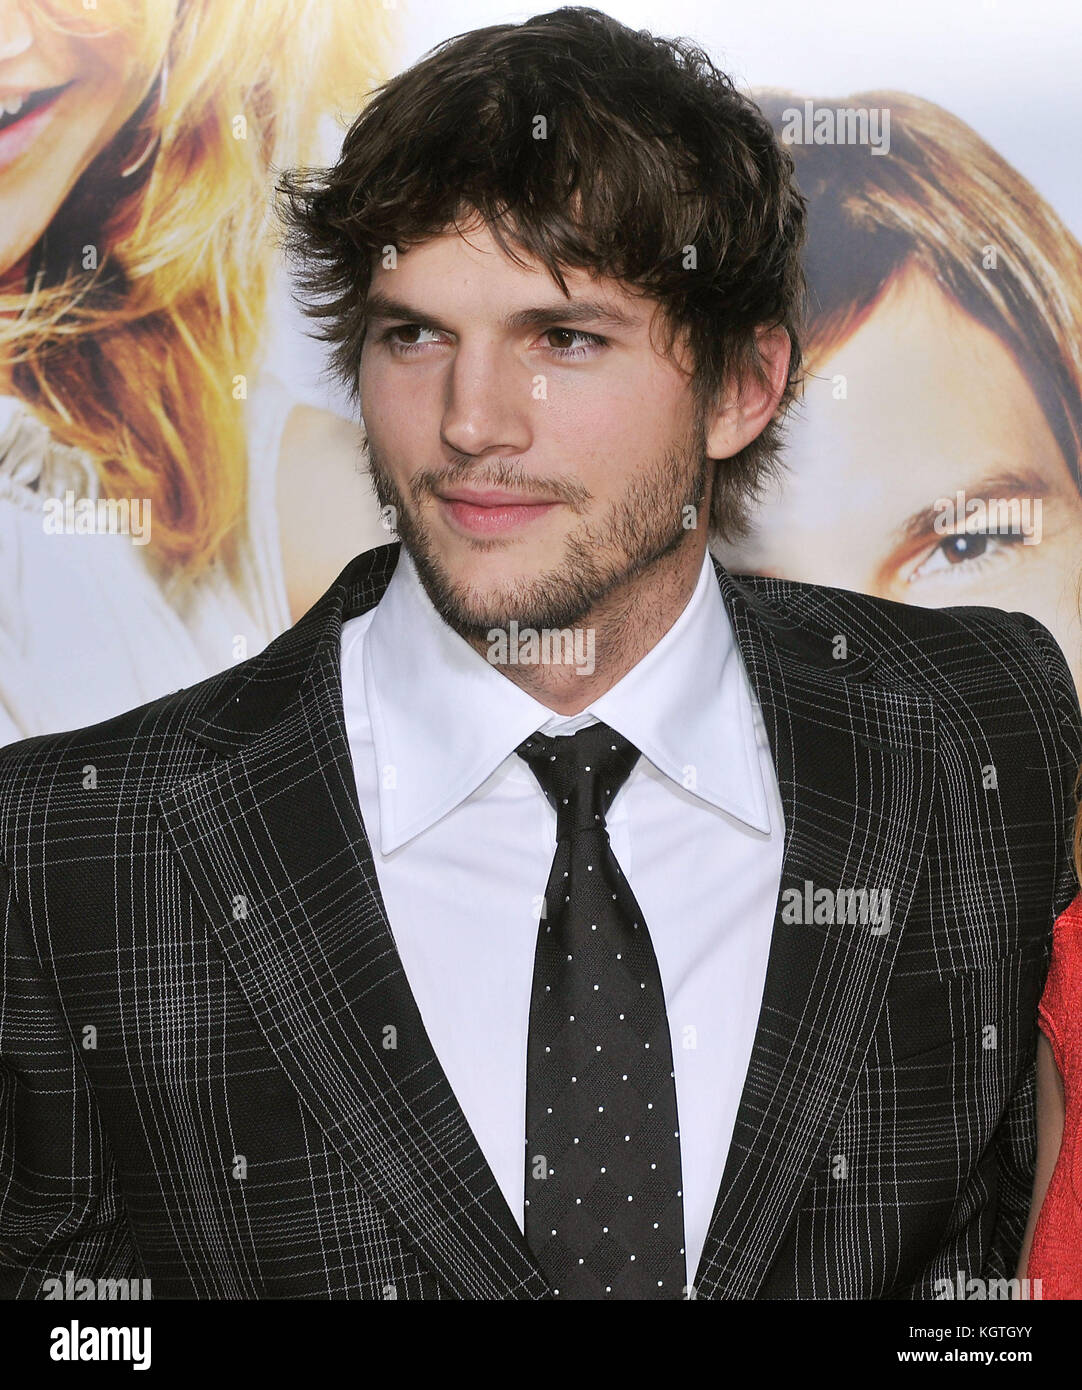 Ashton Kutcher, What Happens In Vegas Premiere at the Westwood Village Theatre In Los Angeles.  three quarters smile Ashton Kutcher -  = People,  headshot Premiere, Awards show,  Arrival, Red Carpet Event, Vertical, Smiling, Film Industry,  USA, Movie actor, movie celebrity, Artist, Celebrity, Looking At Camera, Photography, Arts Culture and Entertainment,  Attending an event,  Bestof, One Person, Stock Photo